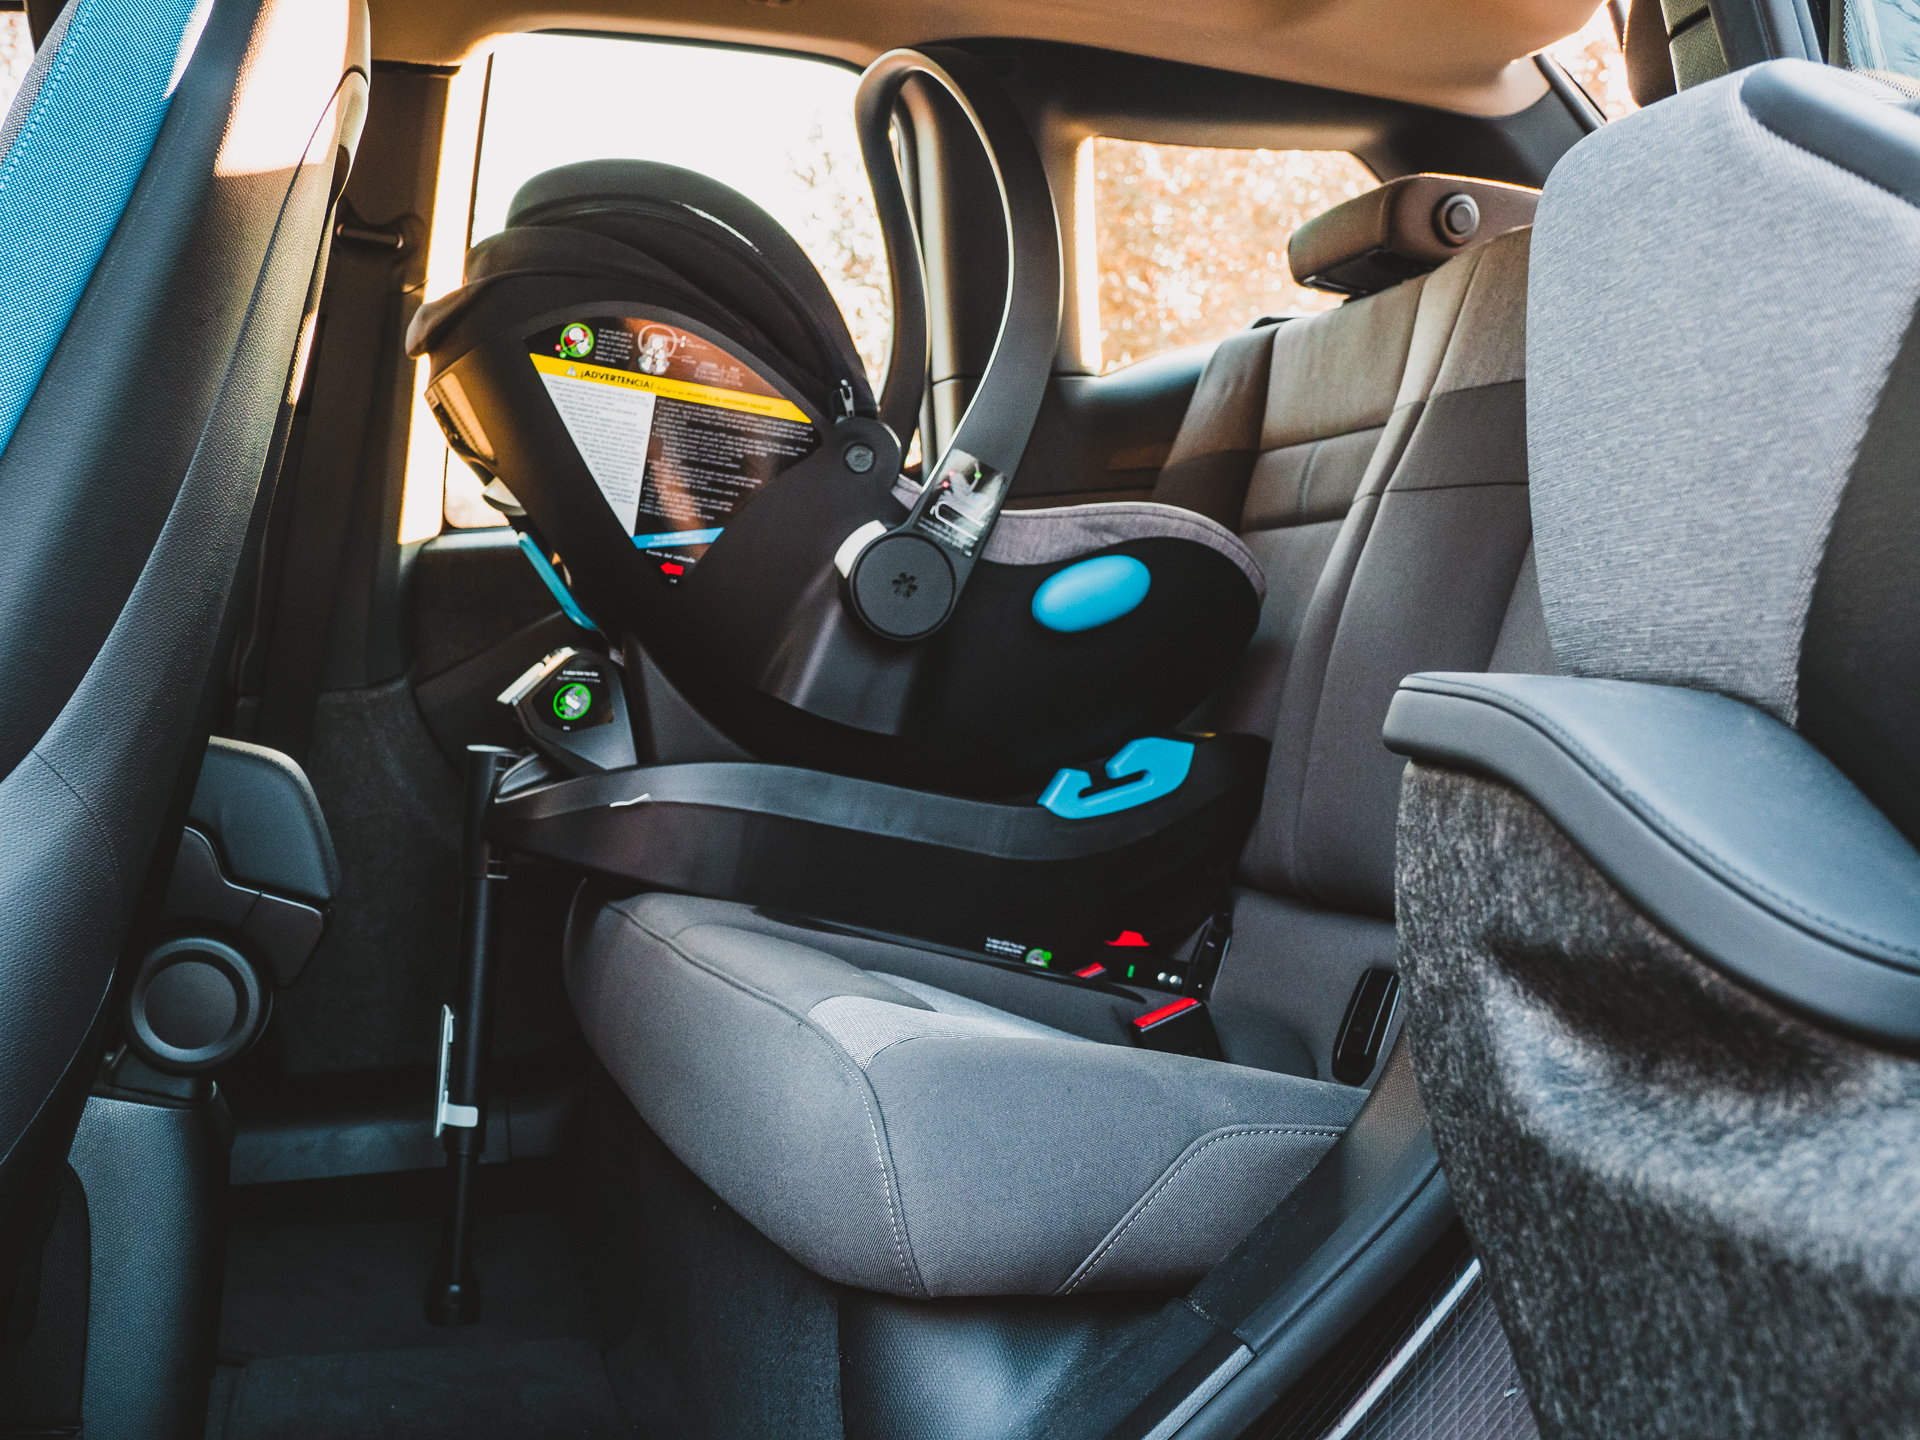 BMW i3 Review Can The Interior Fit A Car Seat and Stroller?